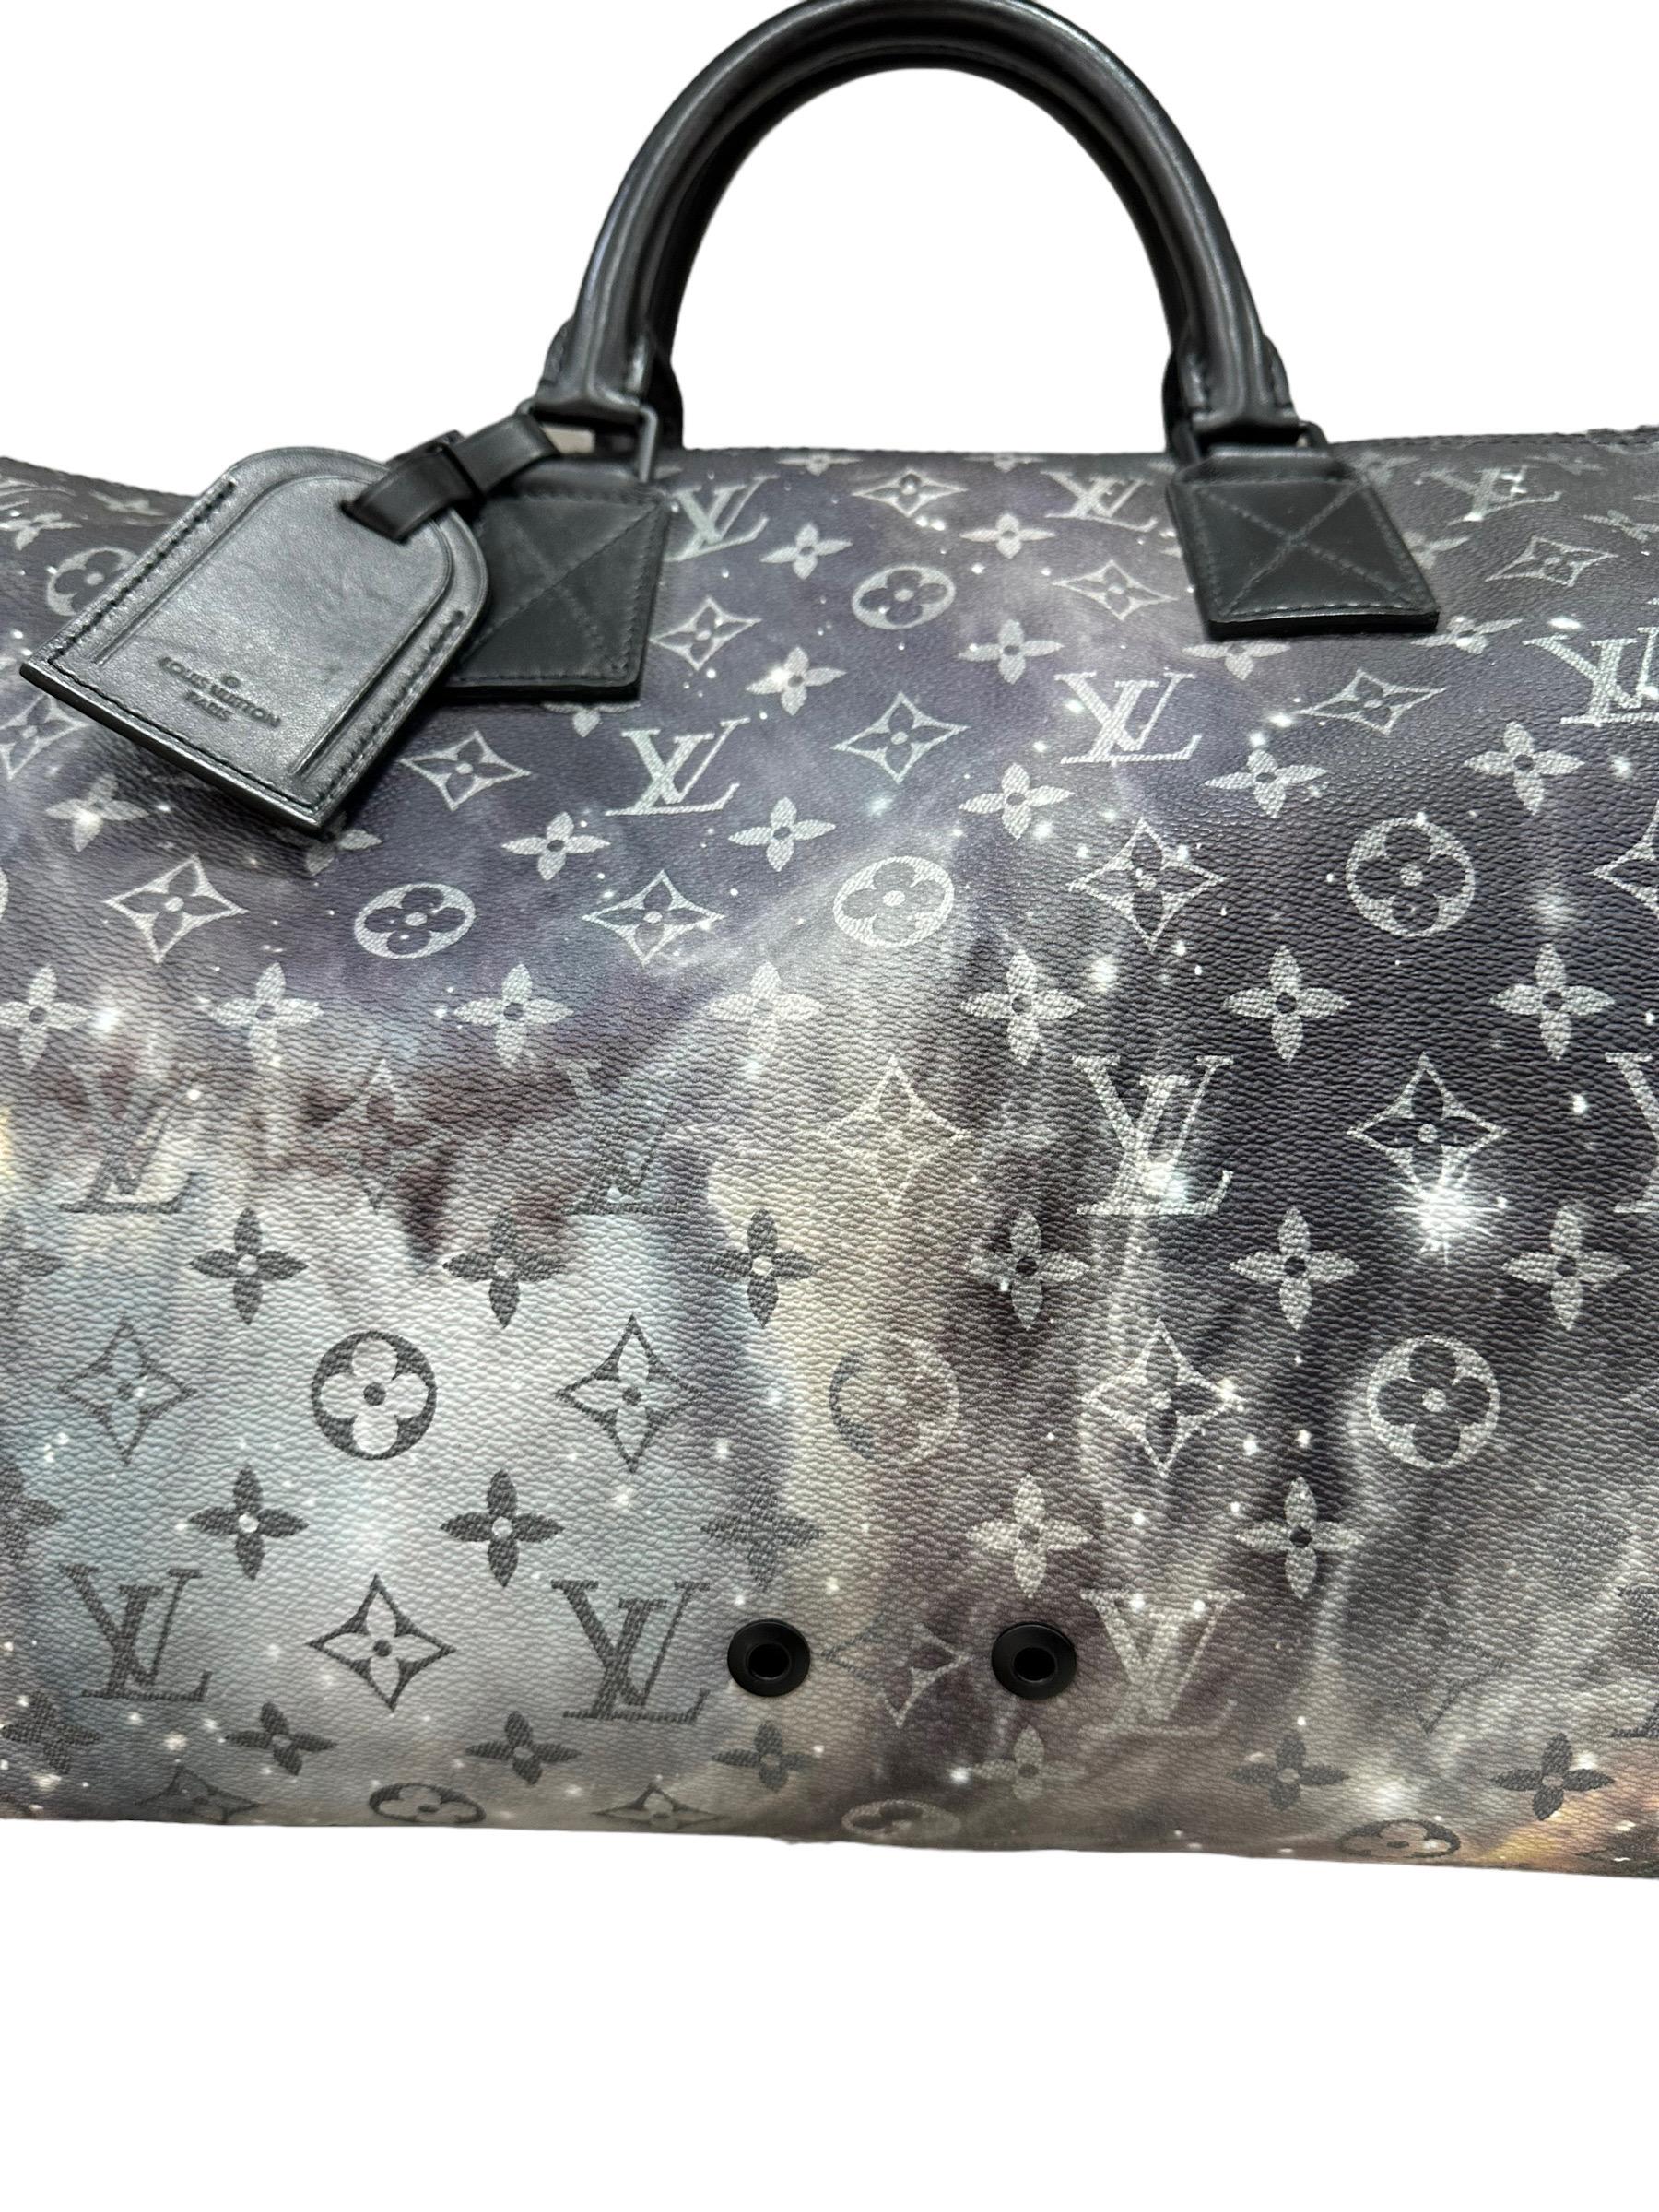 Louis Vuitton Galaxy Keepall Bandouliere 50 Limited Edition Travel Bag In Excellent Condition For Sale In Torre Del Greco, IT